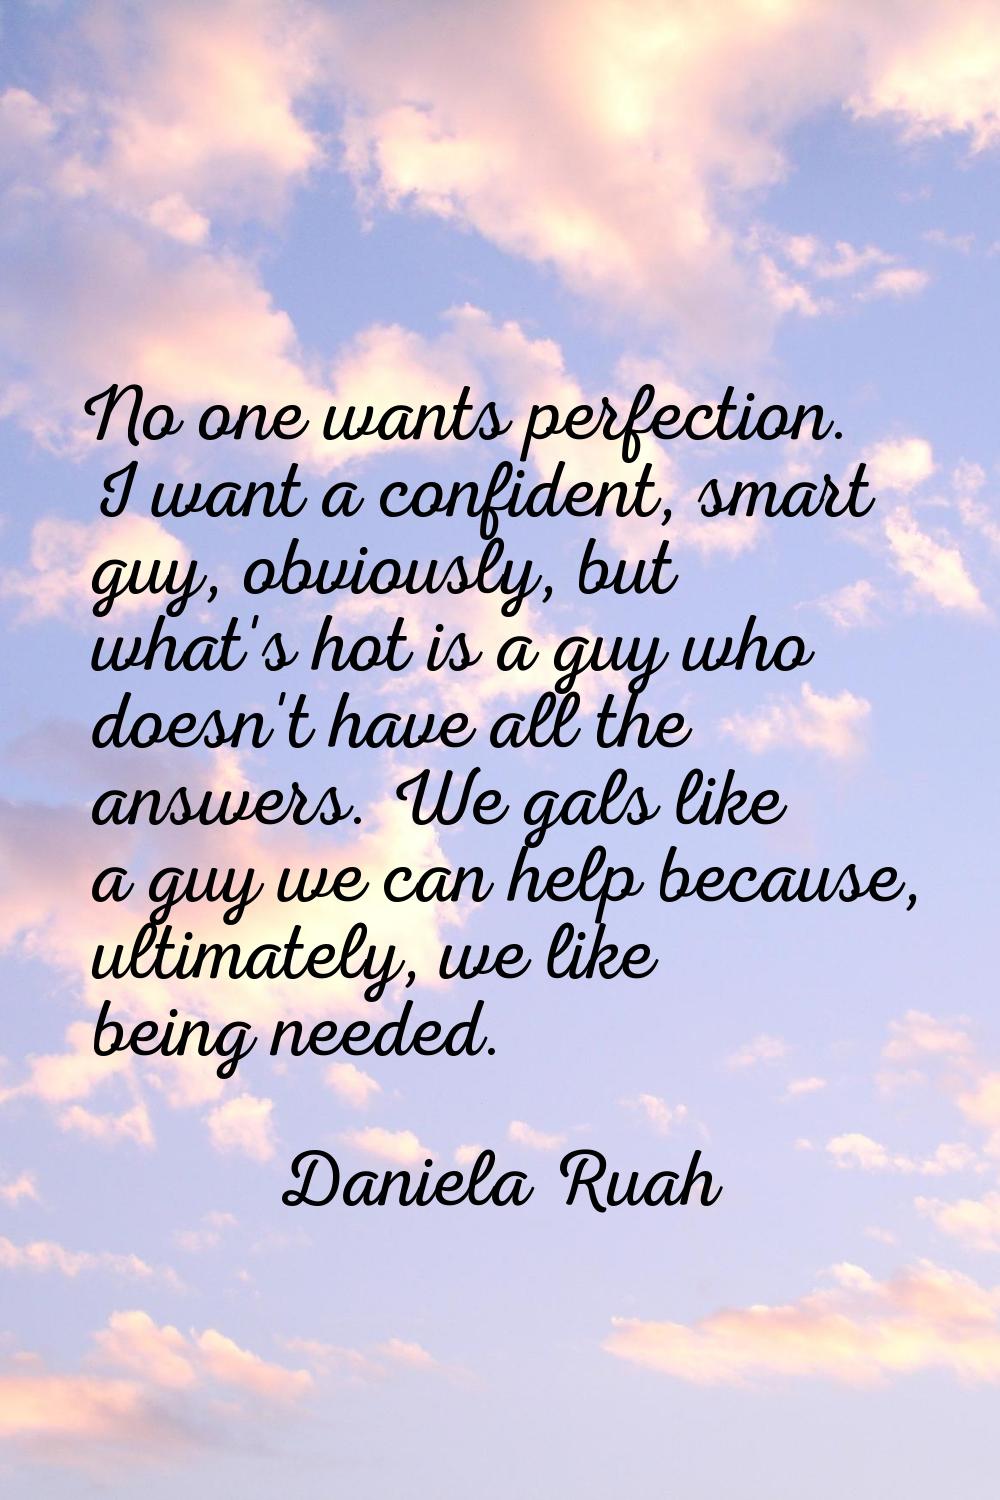 No one wants perfection. I want a confident, smart guy, obviously, but what's hot is a guy who does